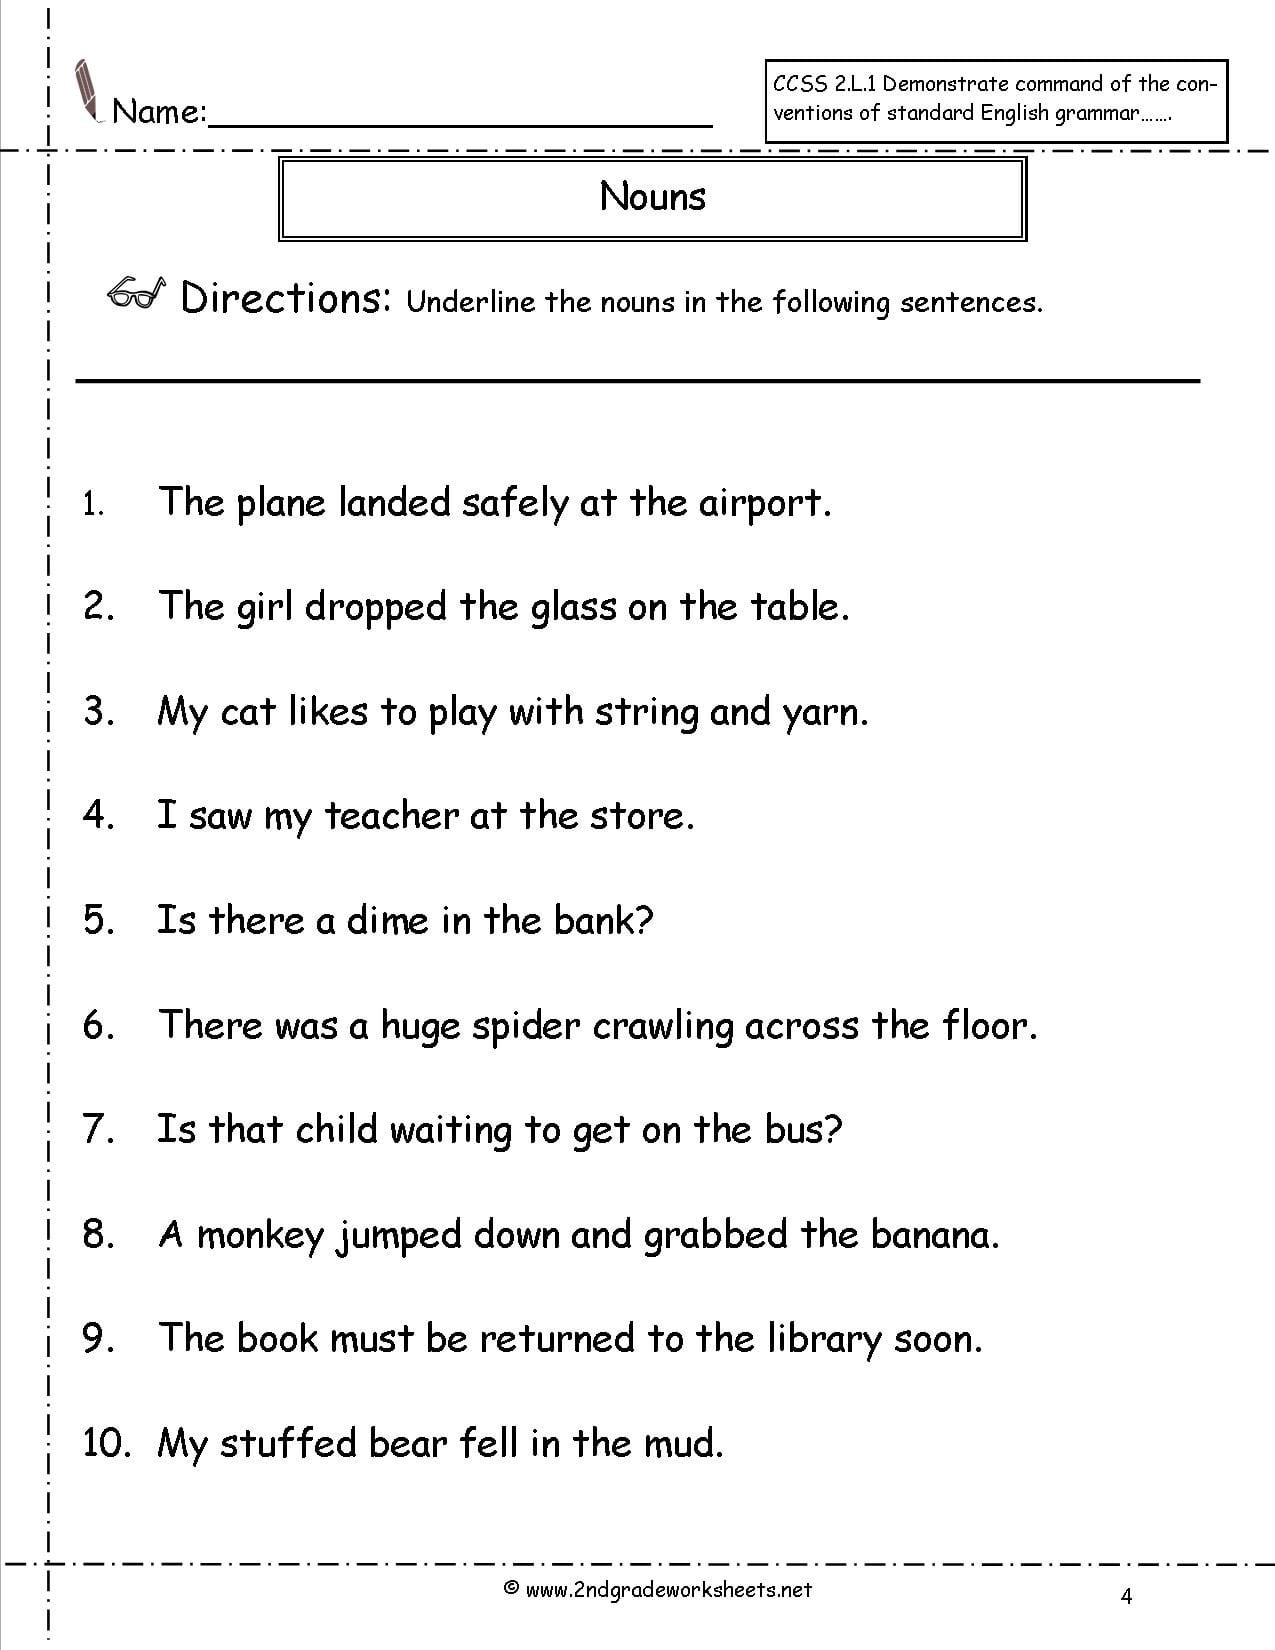 12 Best Images Of Nouns And Pronouns Worksheets Grade 2 Find The 